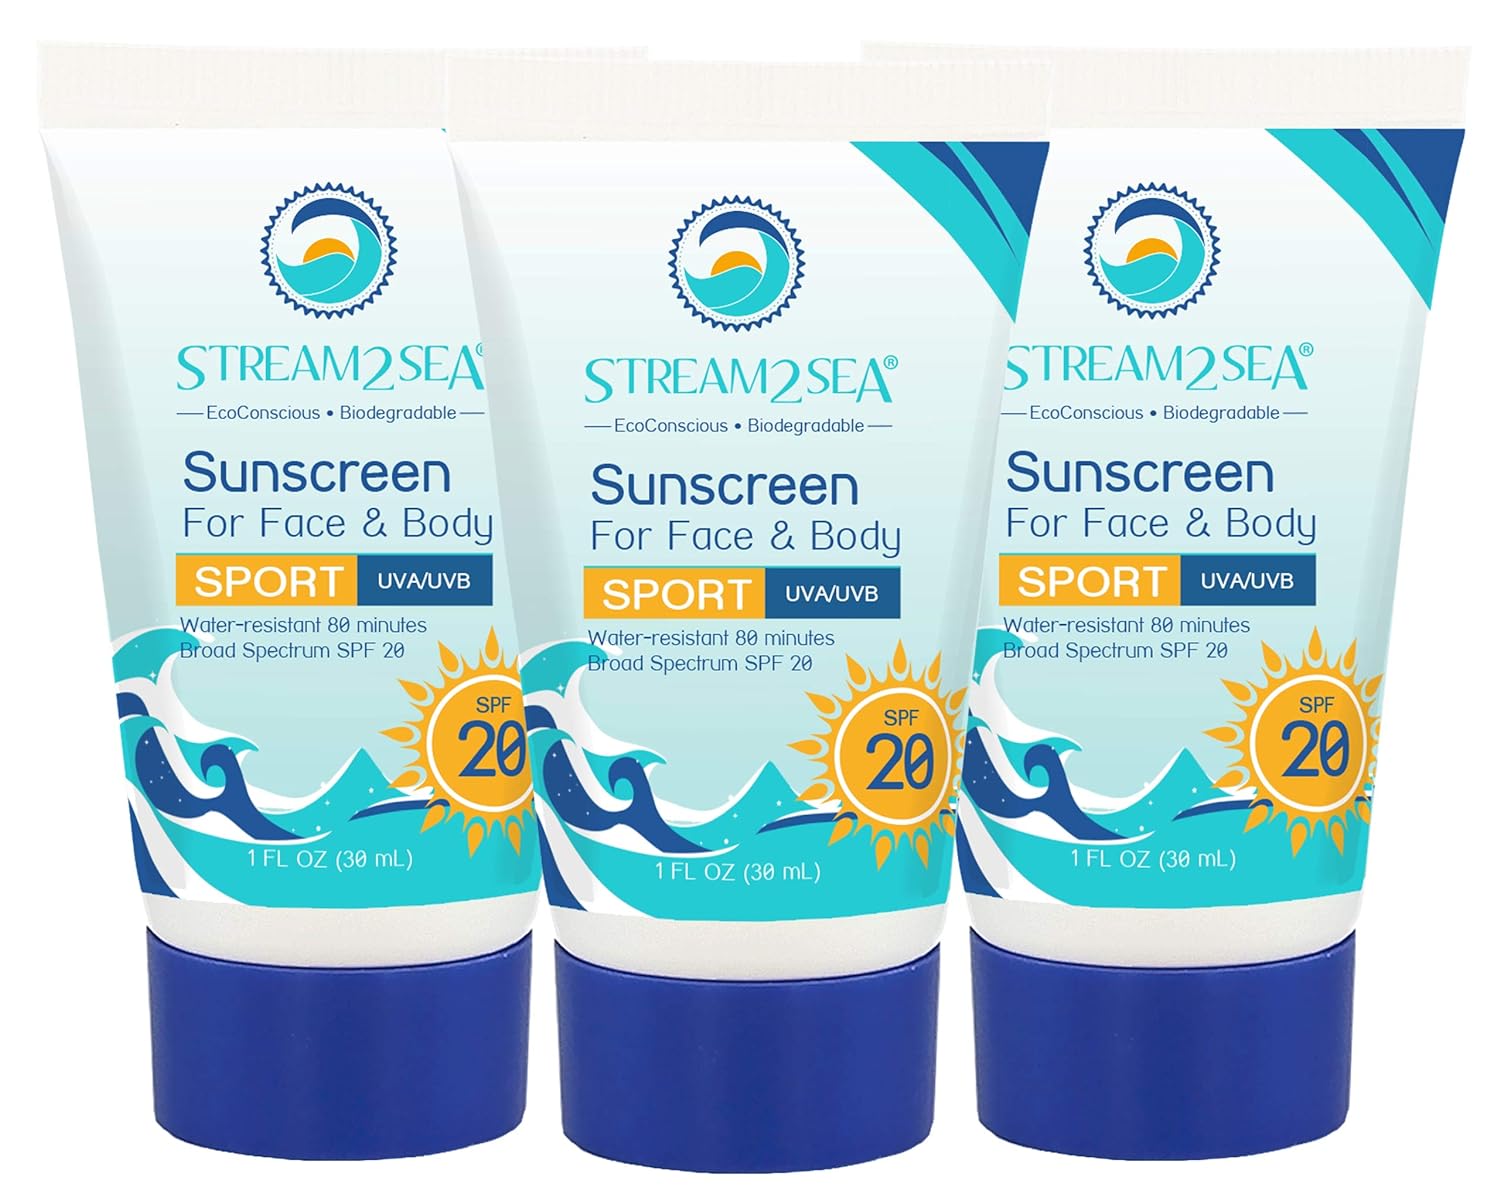 STREAM 2 SEA SPF 20 Mineral Sunscreen Biodegradable and Reef Safe, 1 Fl oz Pack of 3 Travel Size Paraben Free Non Greasy, Moisturizing Mineral Sunscreen For Face, Body Protection Against UVA and UVB